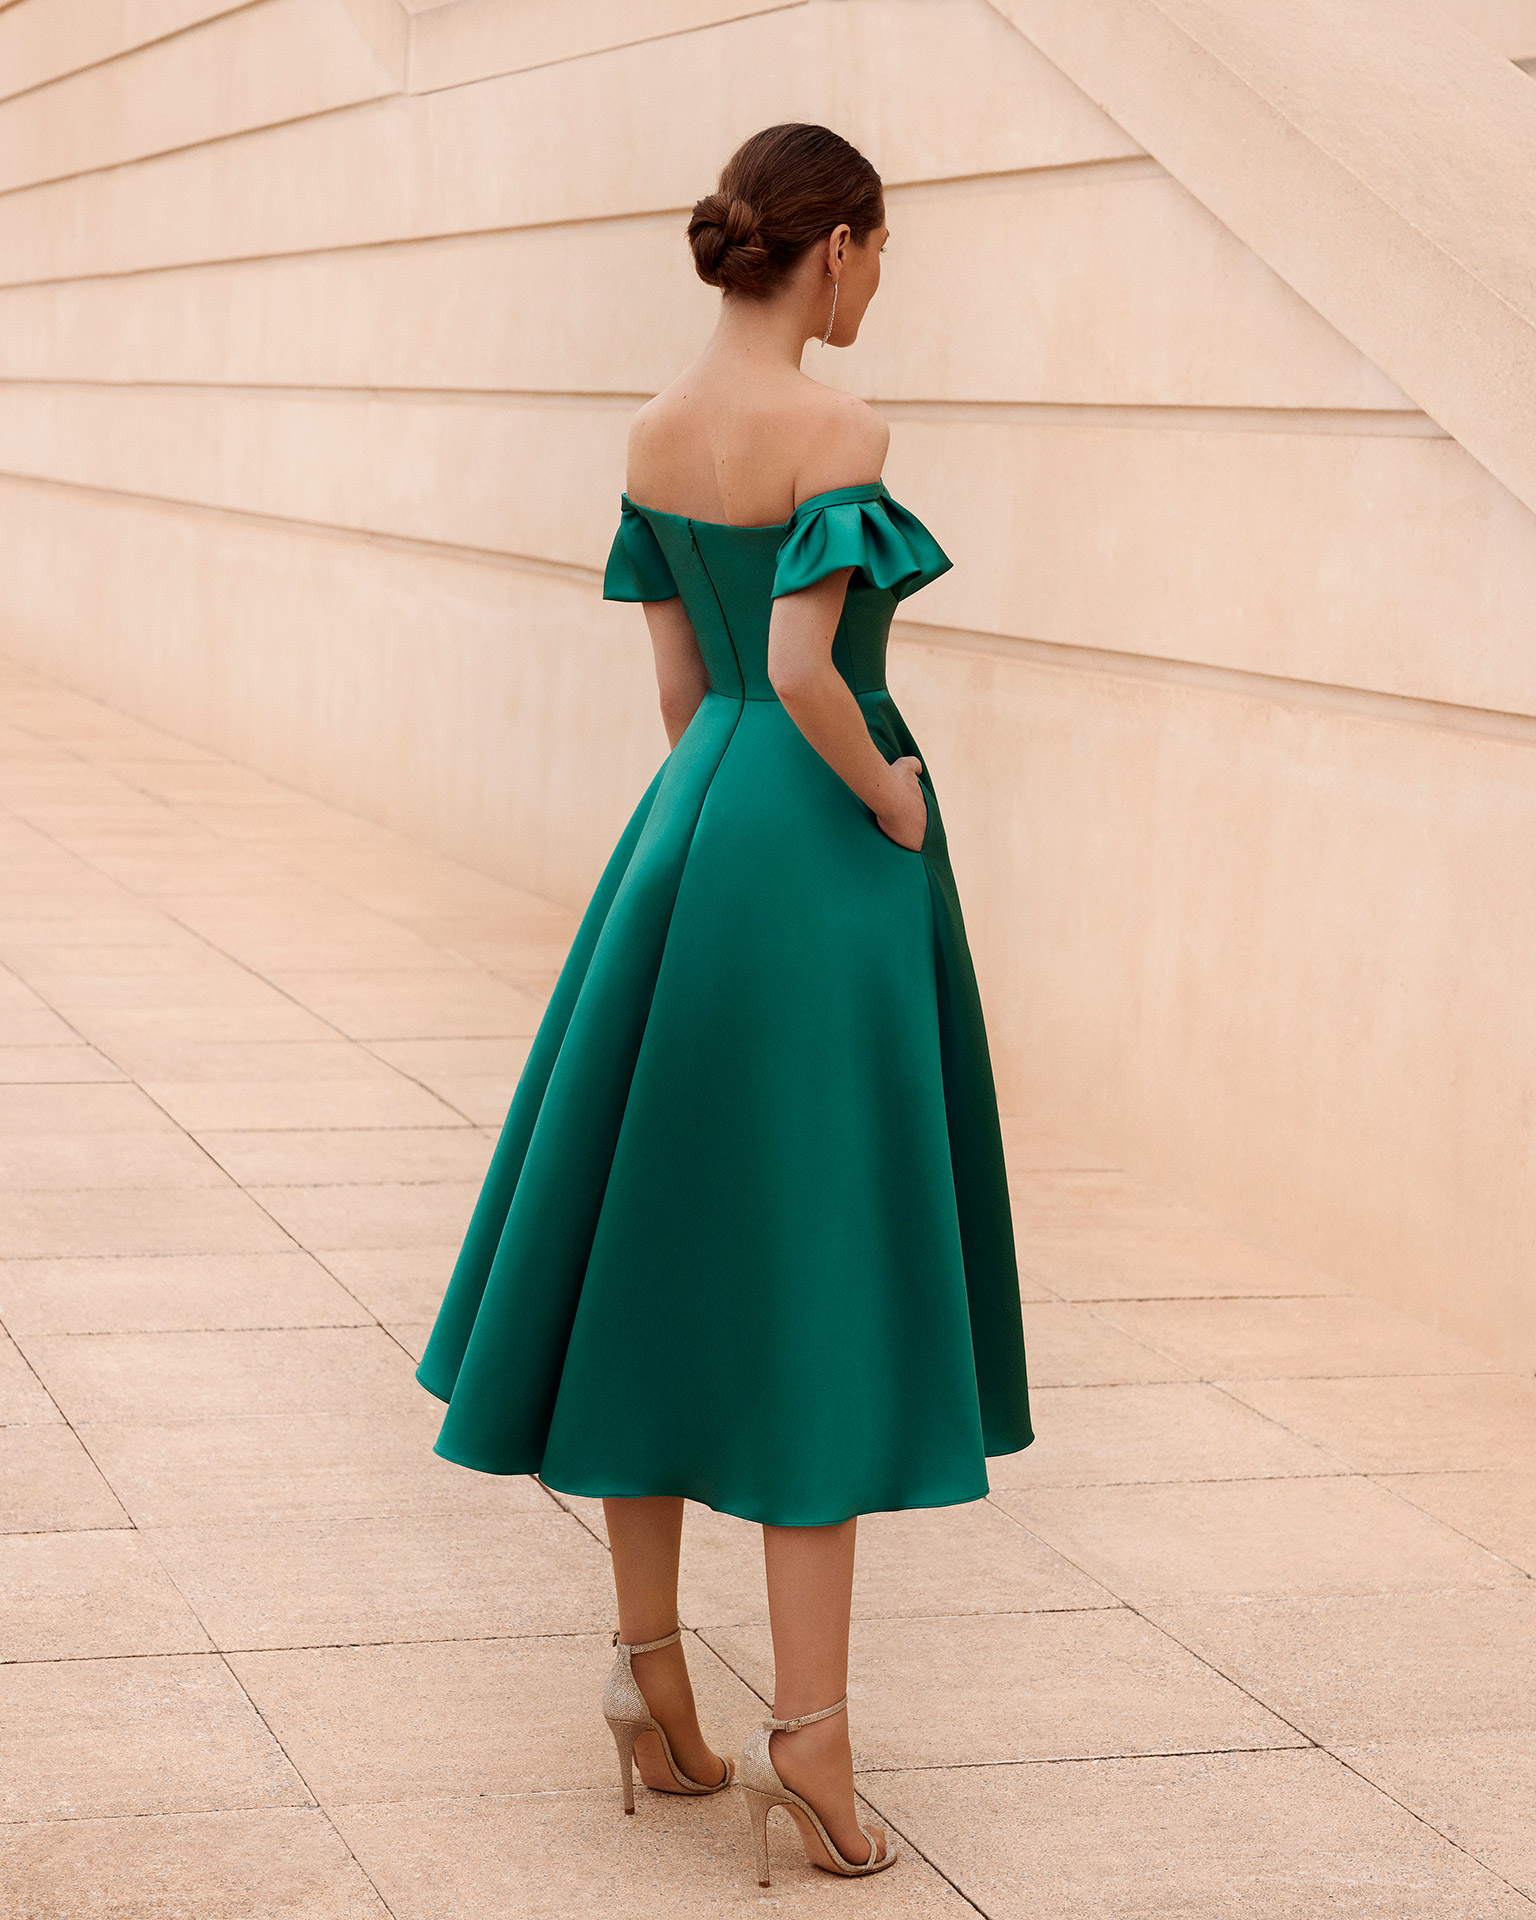 Classic short cocktail dress, made of Mikado. Couture Club design with a strapless neckline, and off-the-shoulder sleeves. MARFIL_BARCELONA.